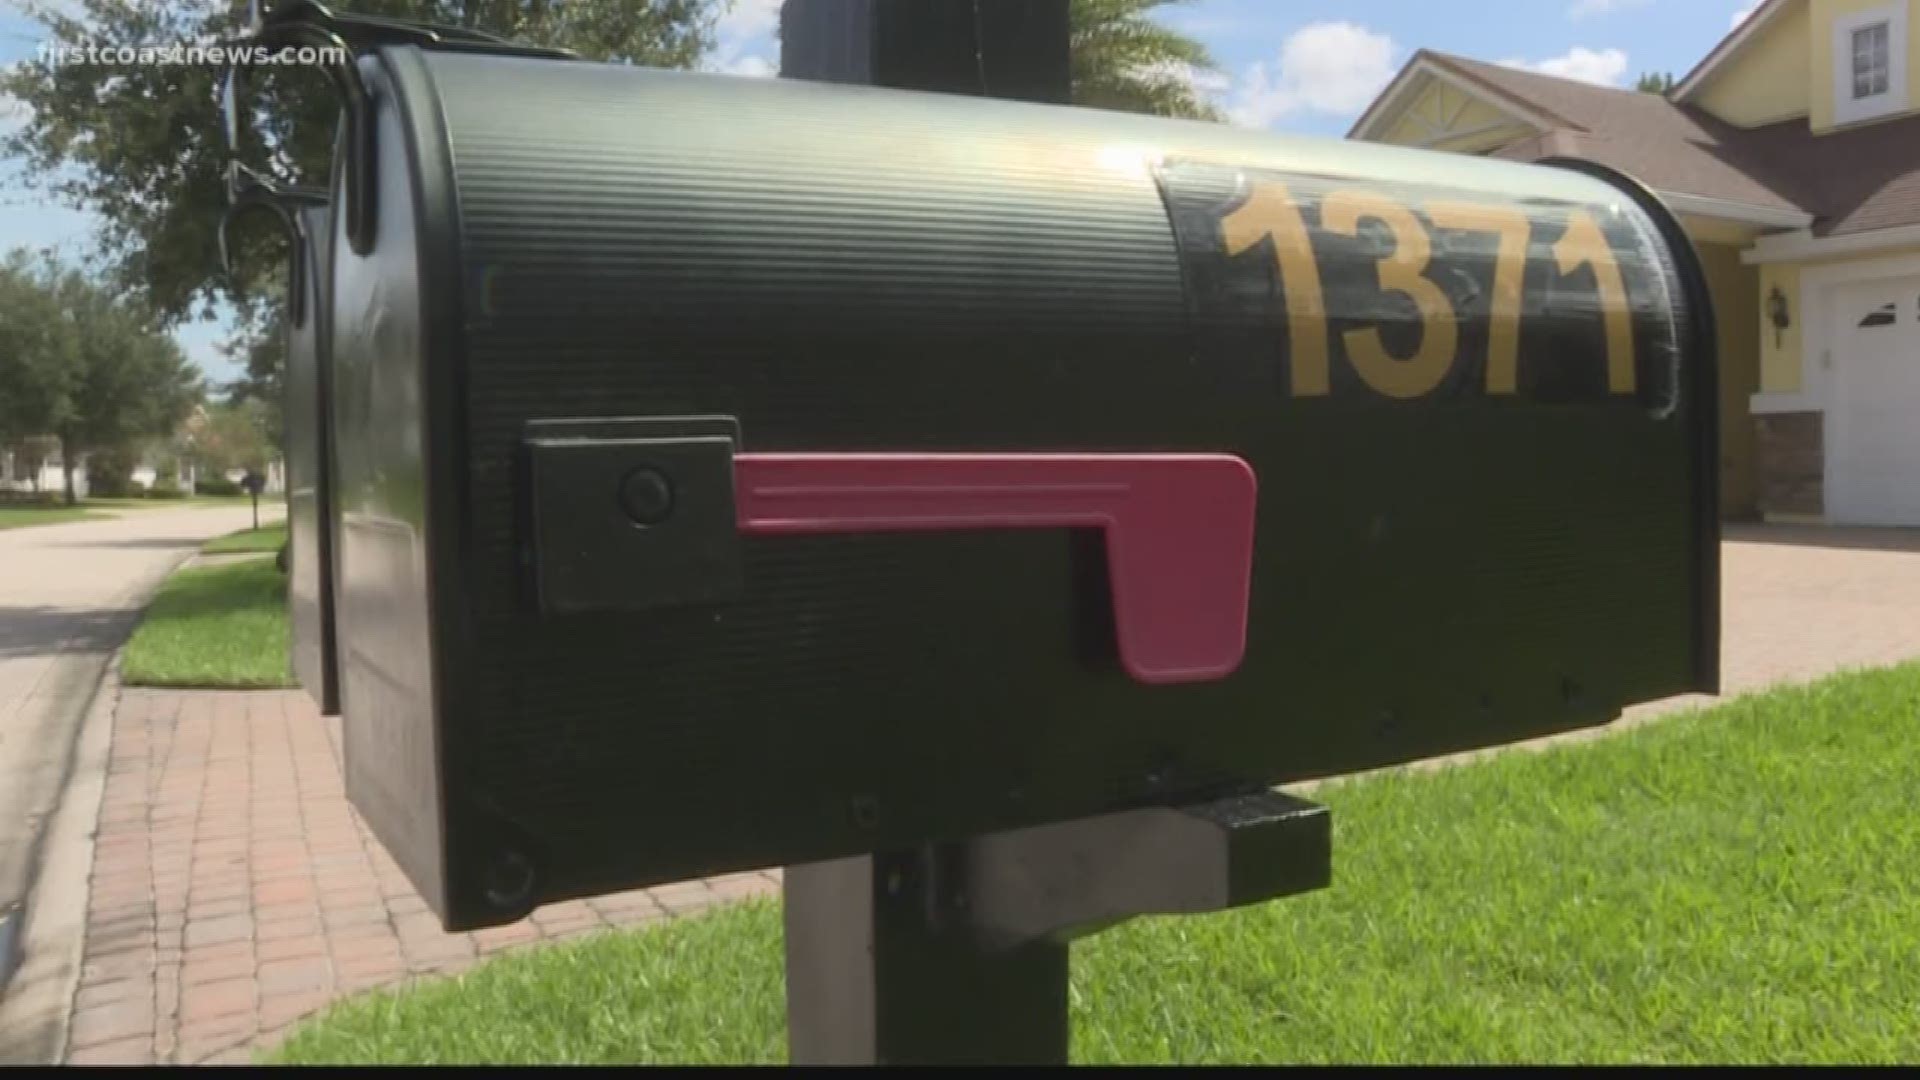 A neighborhood that is home to many senior citizens has been experiencing issues with the post office that could prove to be dangerous.